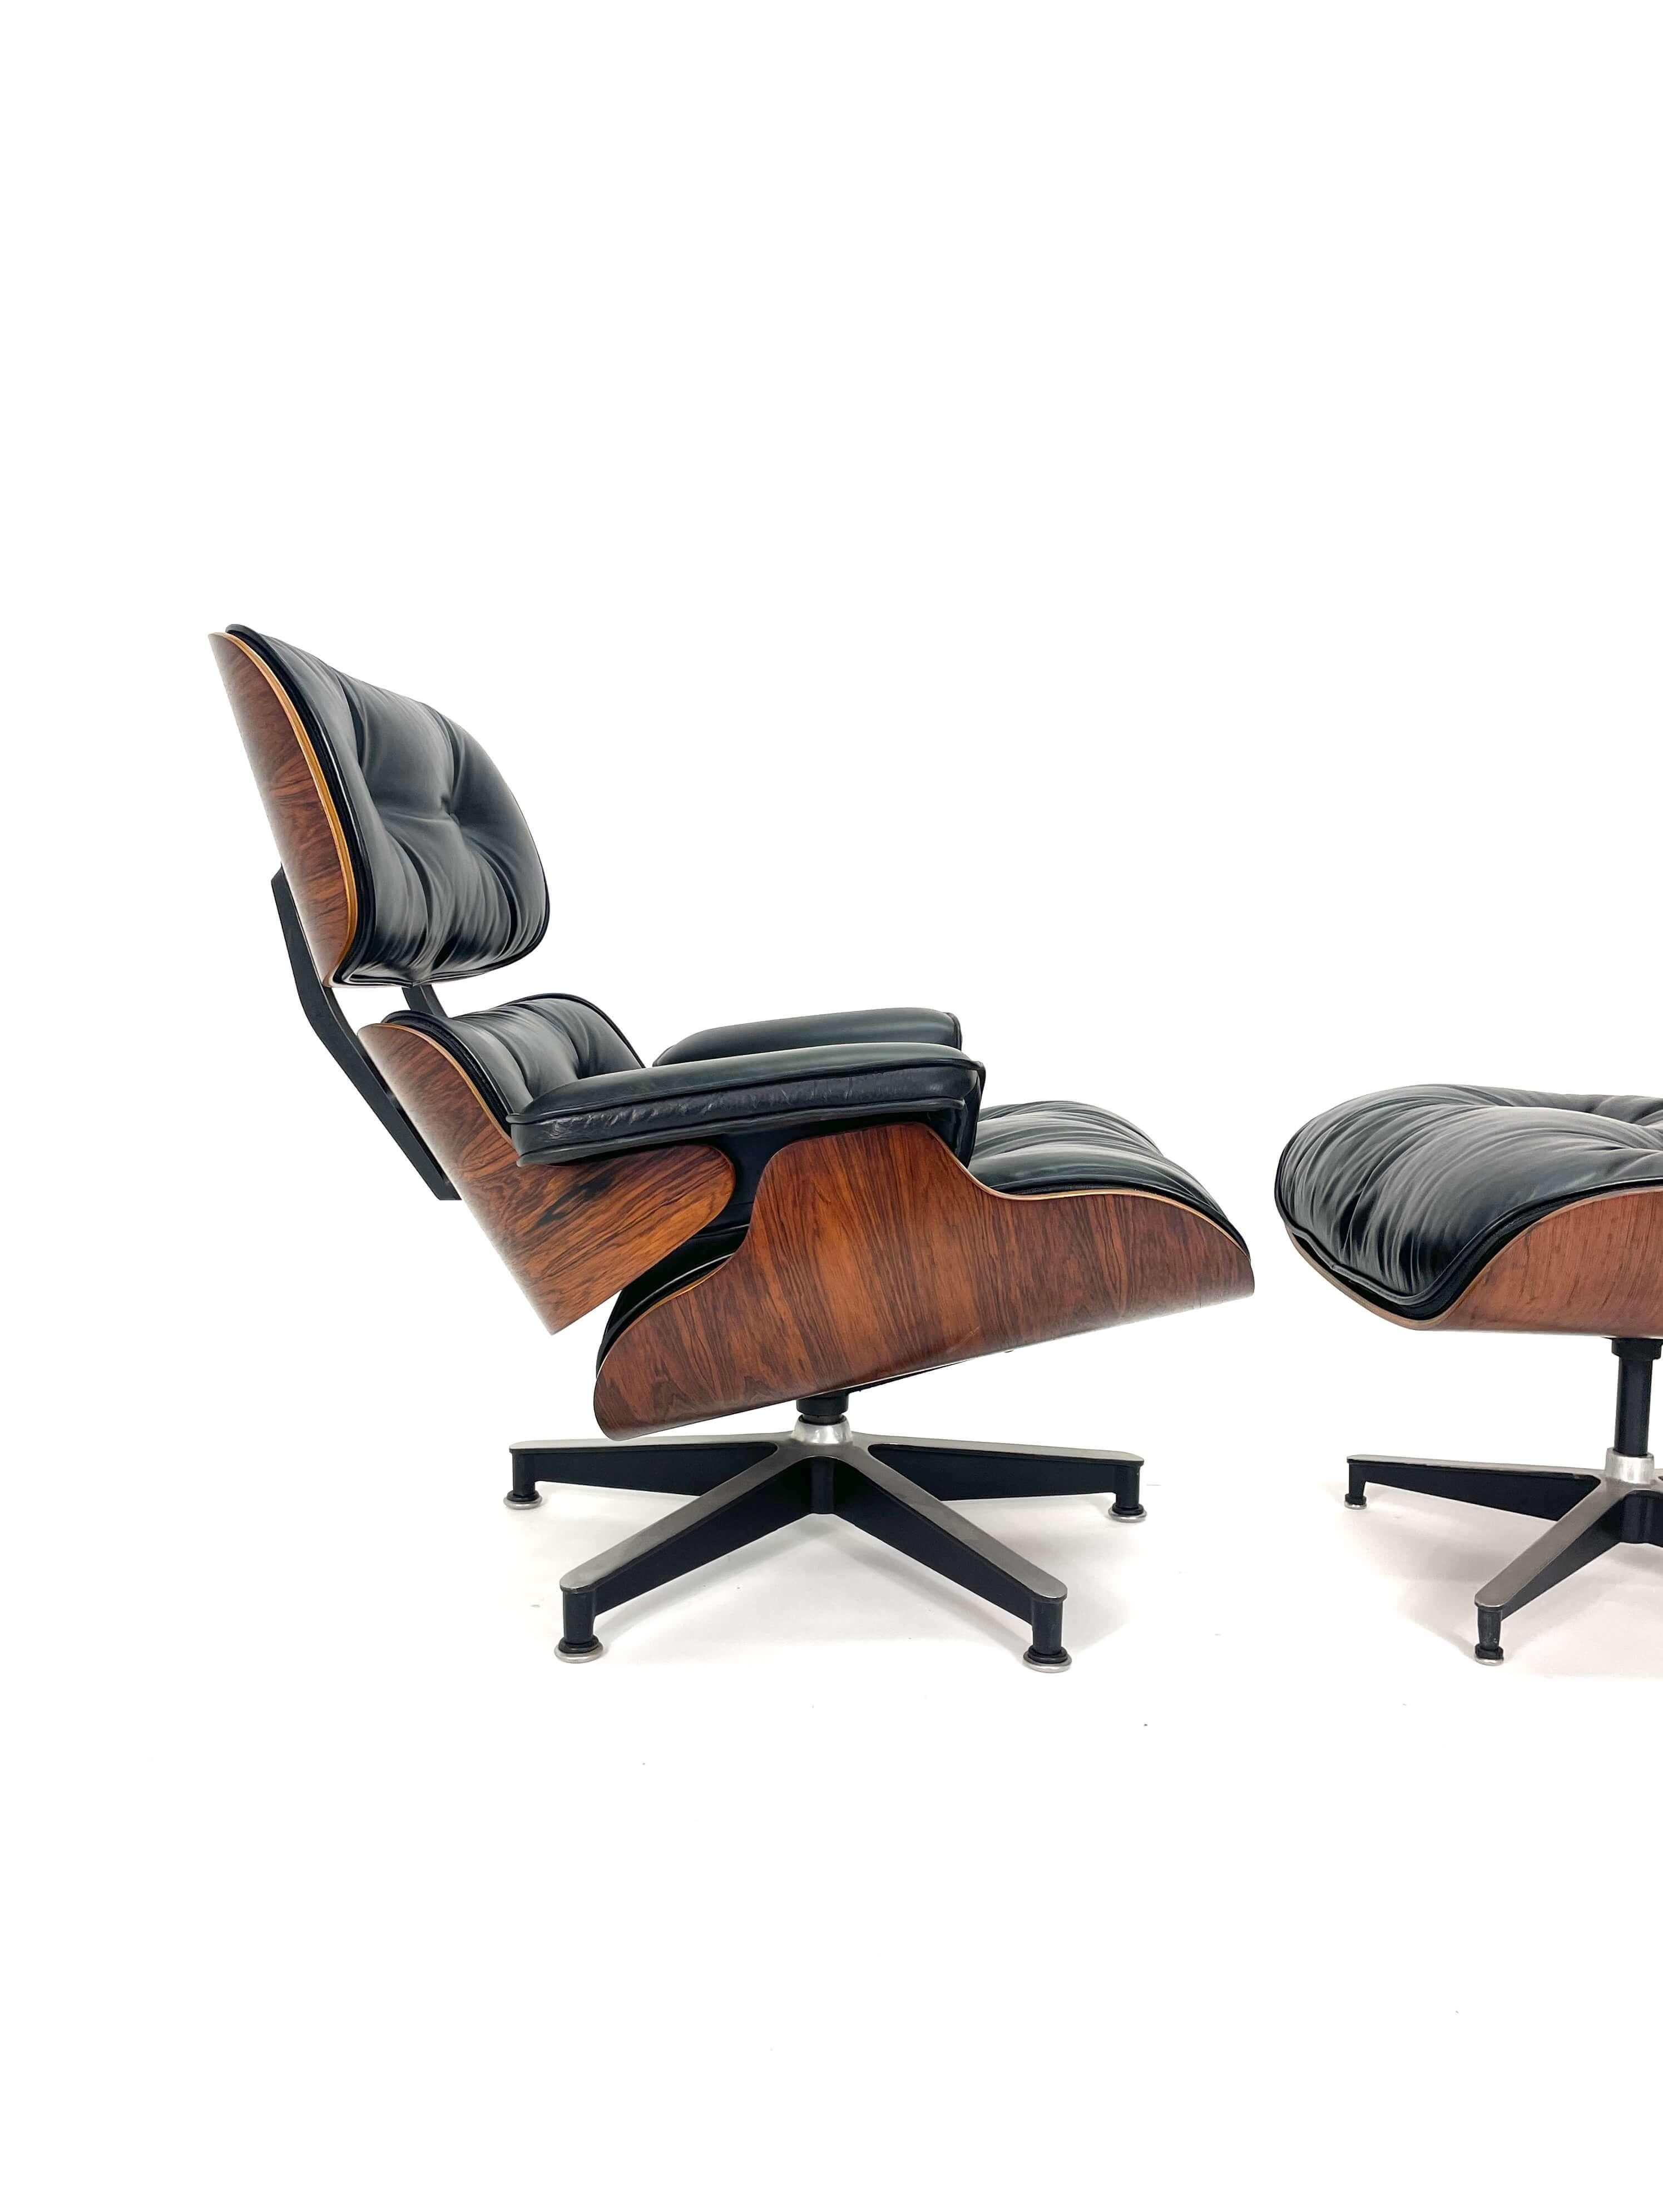 Leather 2nd Generation Eames Lounge Chair and Ottoman in Rosewood, Circa 1960's